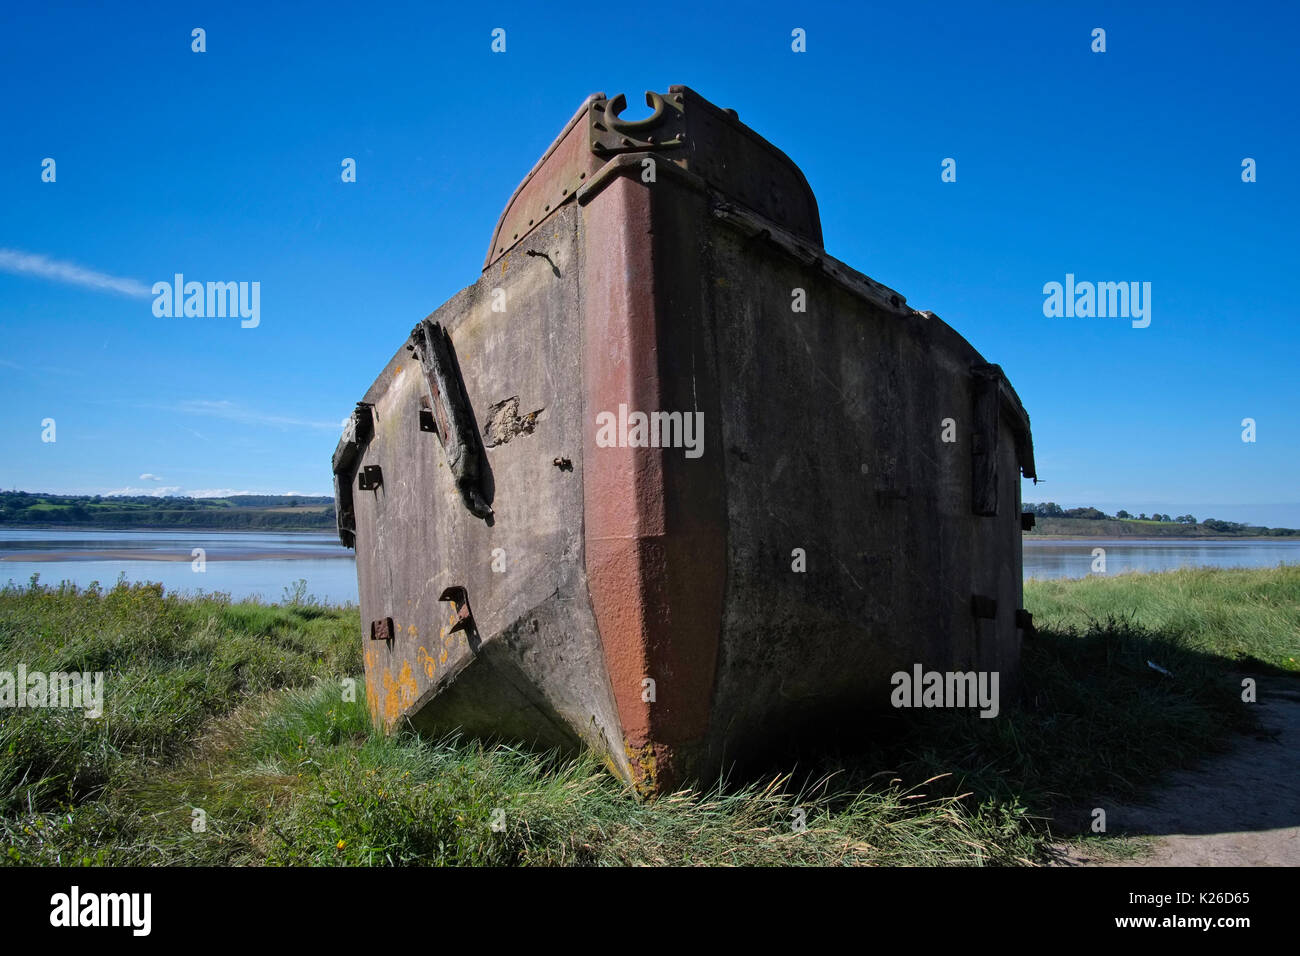 A concrete barge (ferrocement) FCB 75, in the Purton Ship's Graveyard (Purton Hulks), one of many vessels beached on the bank of the River Severn. Stock Photo